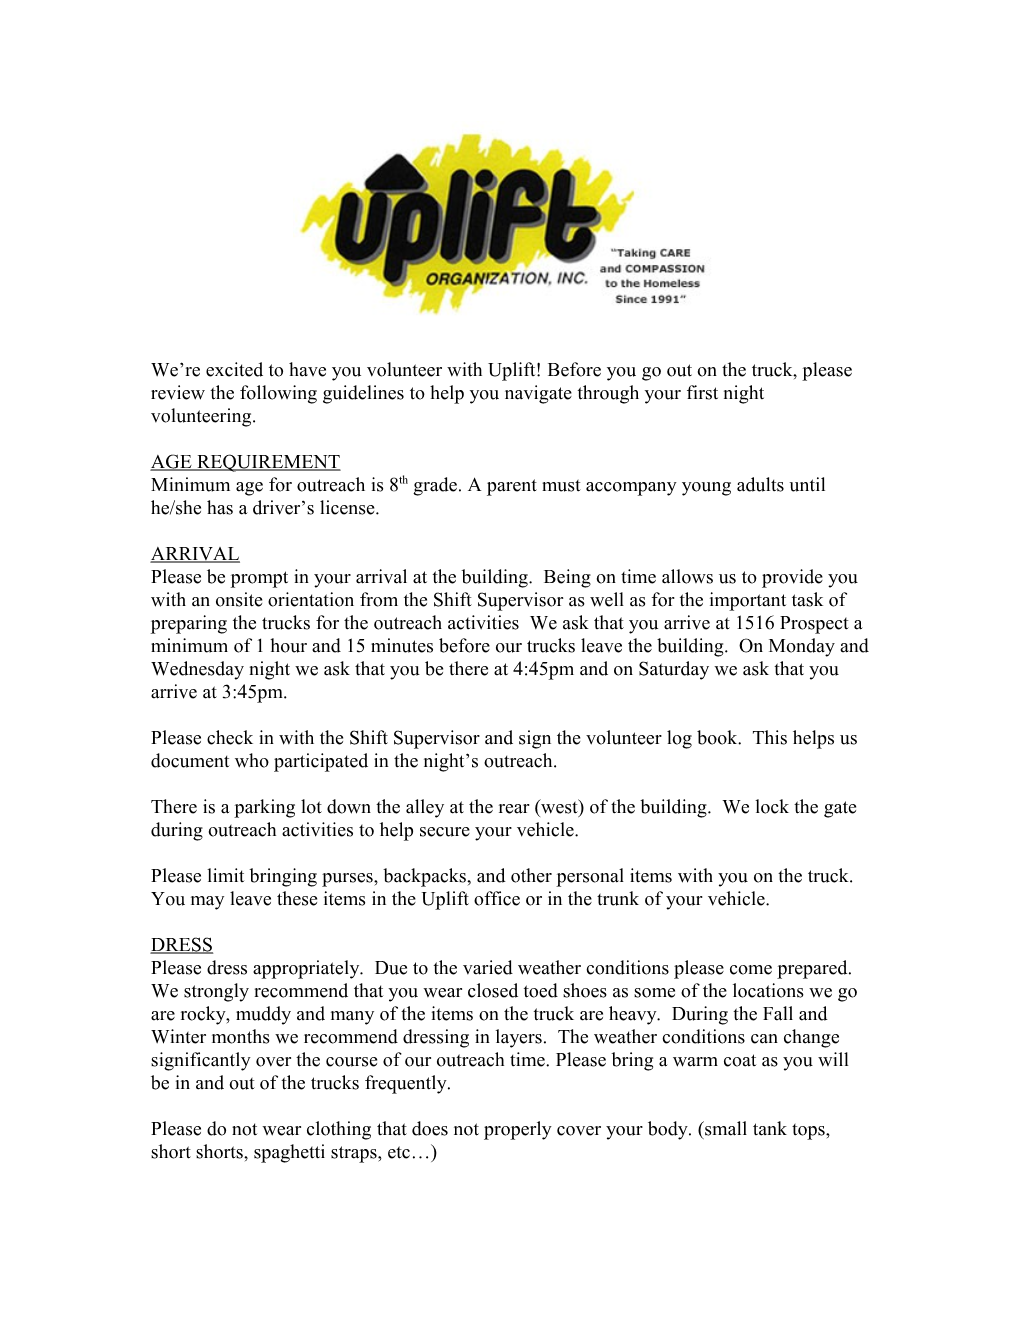 We Re Excited to Have You Volunteer with Uplift! Before You Go out on the Truck, Please